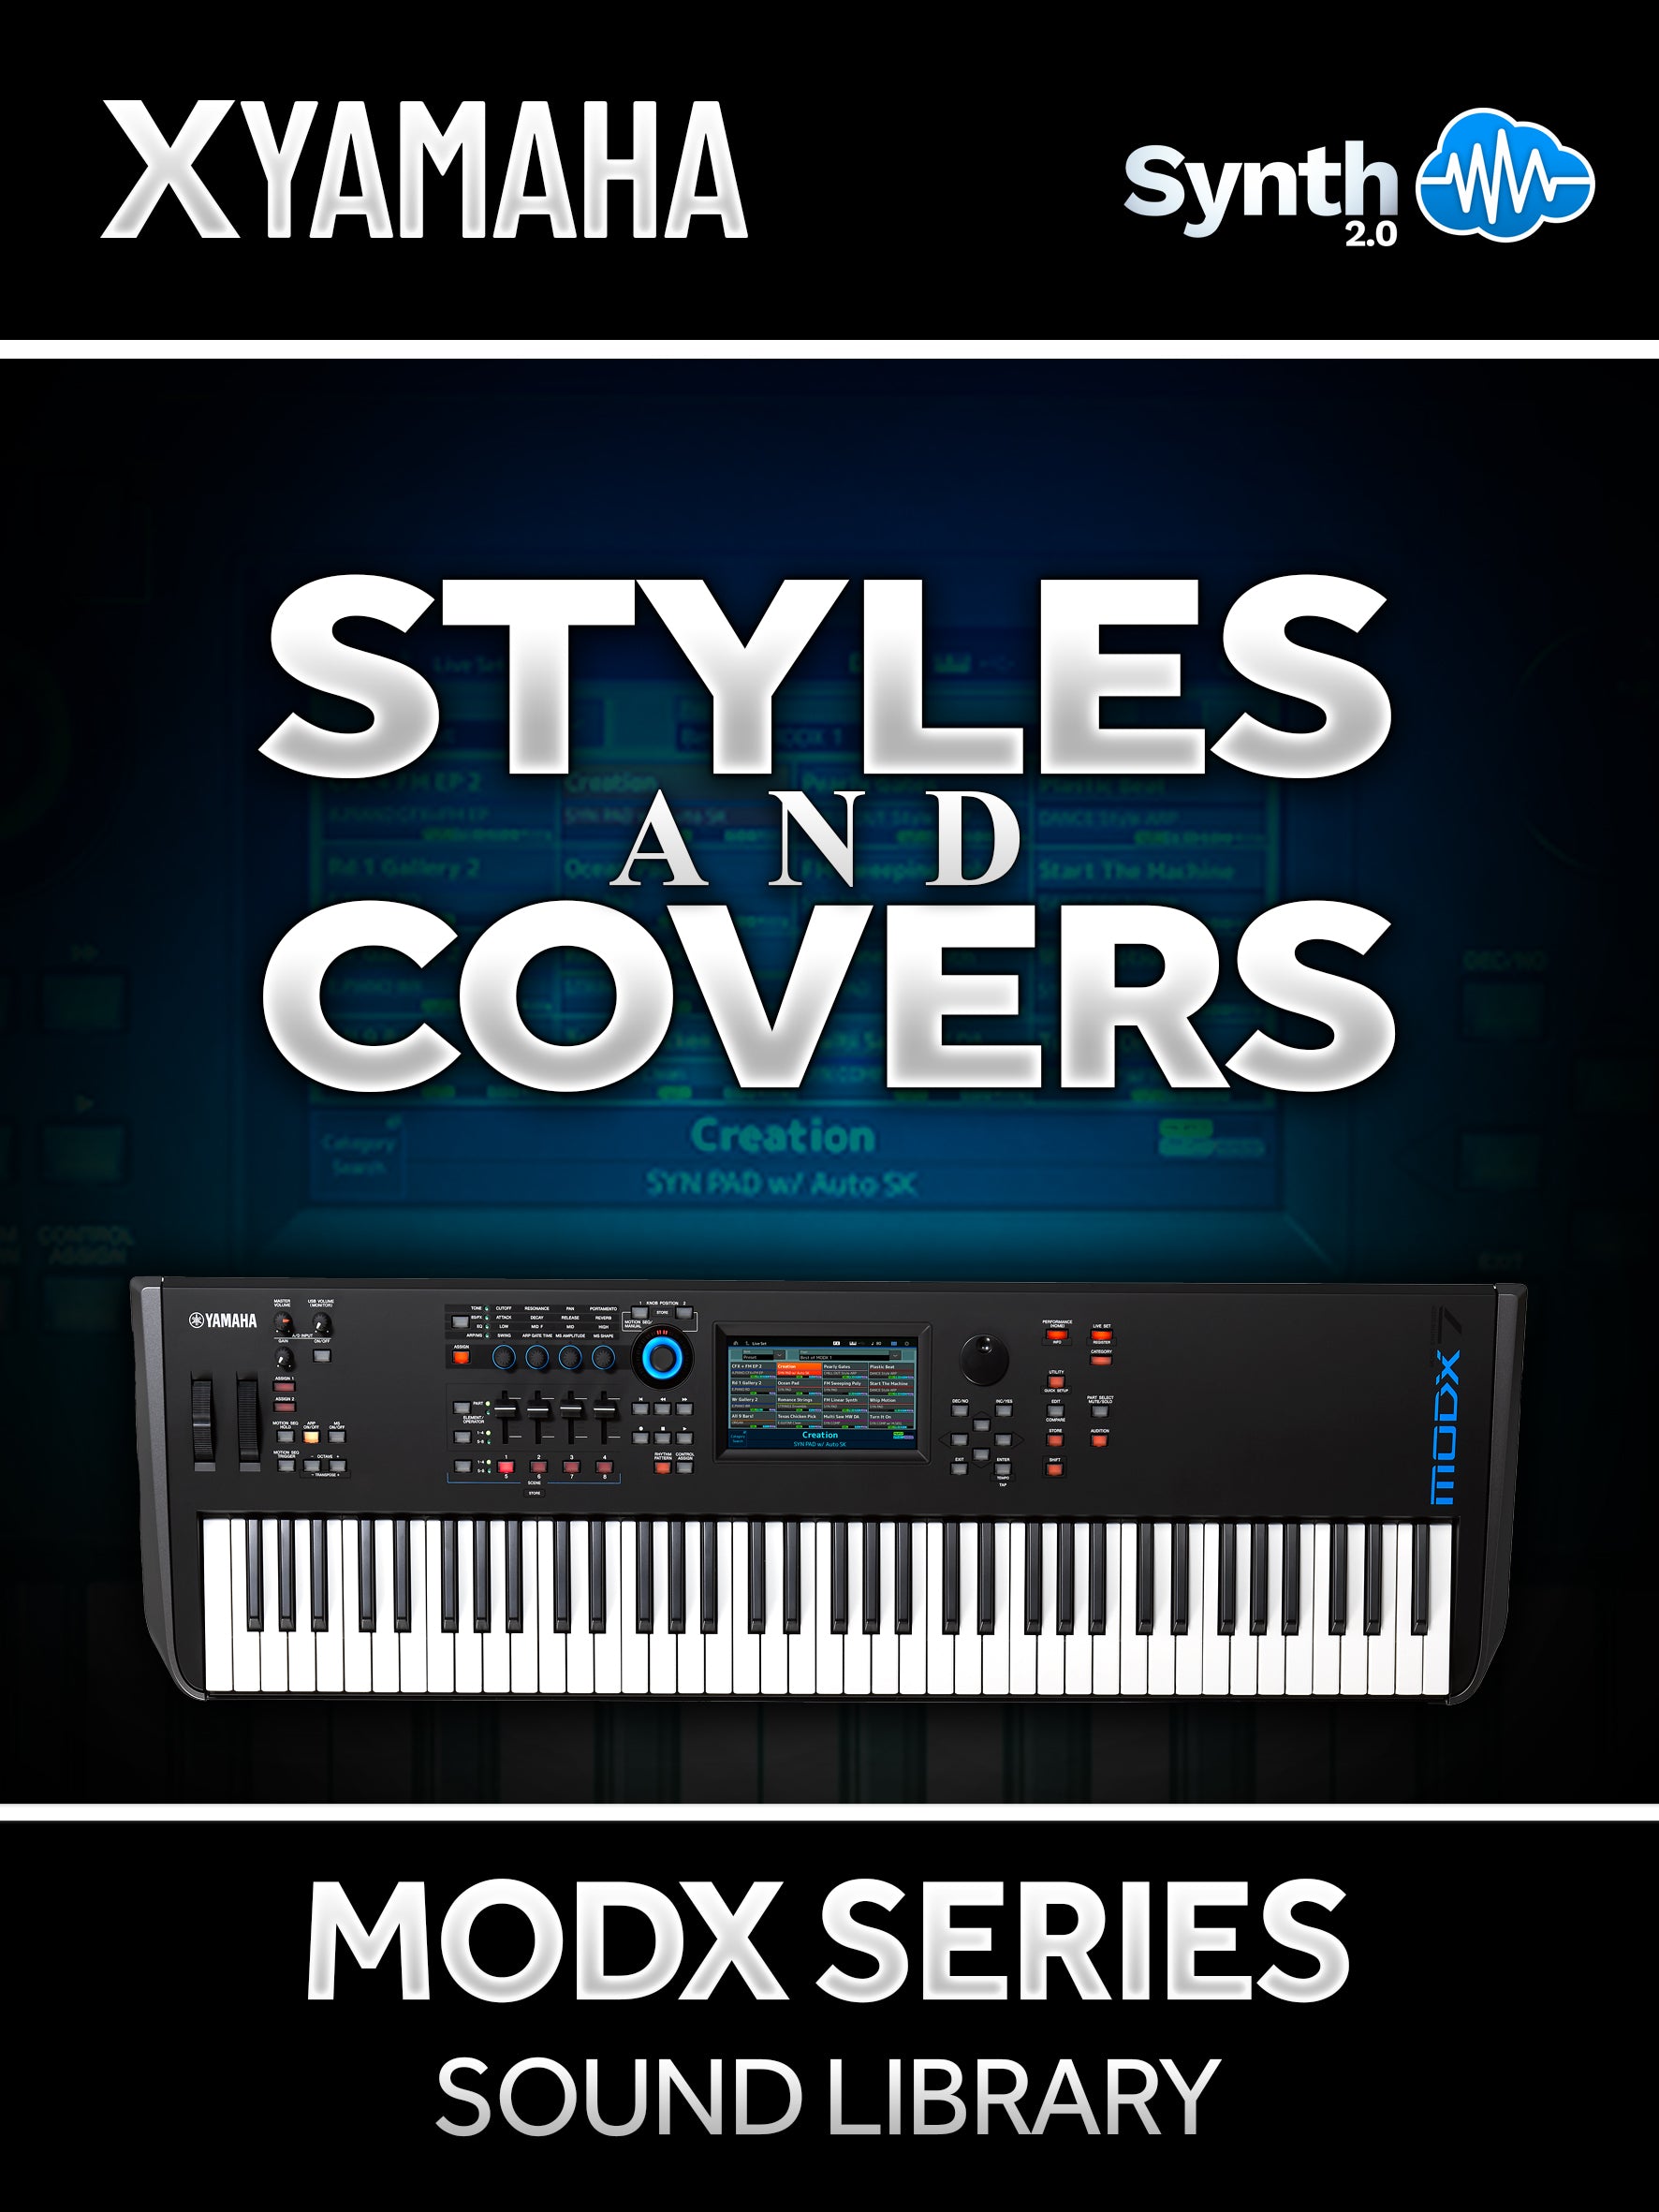 SCL151 - ( Bundle ) - Styles and Covers + 80's Best Hits Complete Collection - Yamaha MODX / MODX+